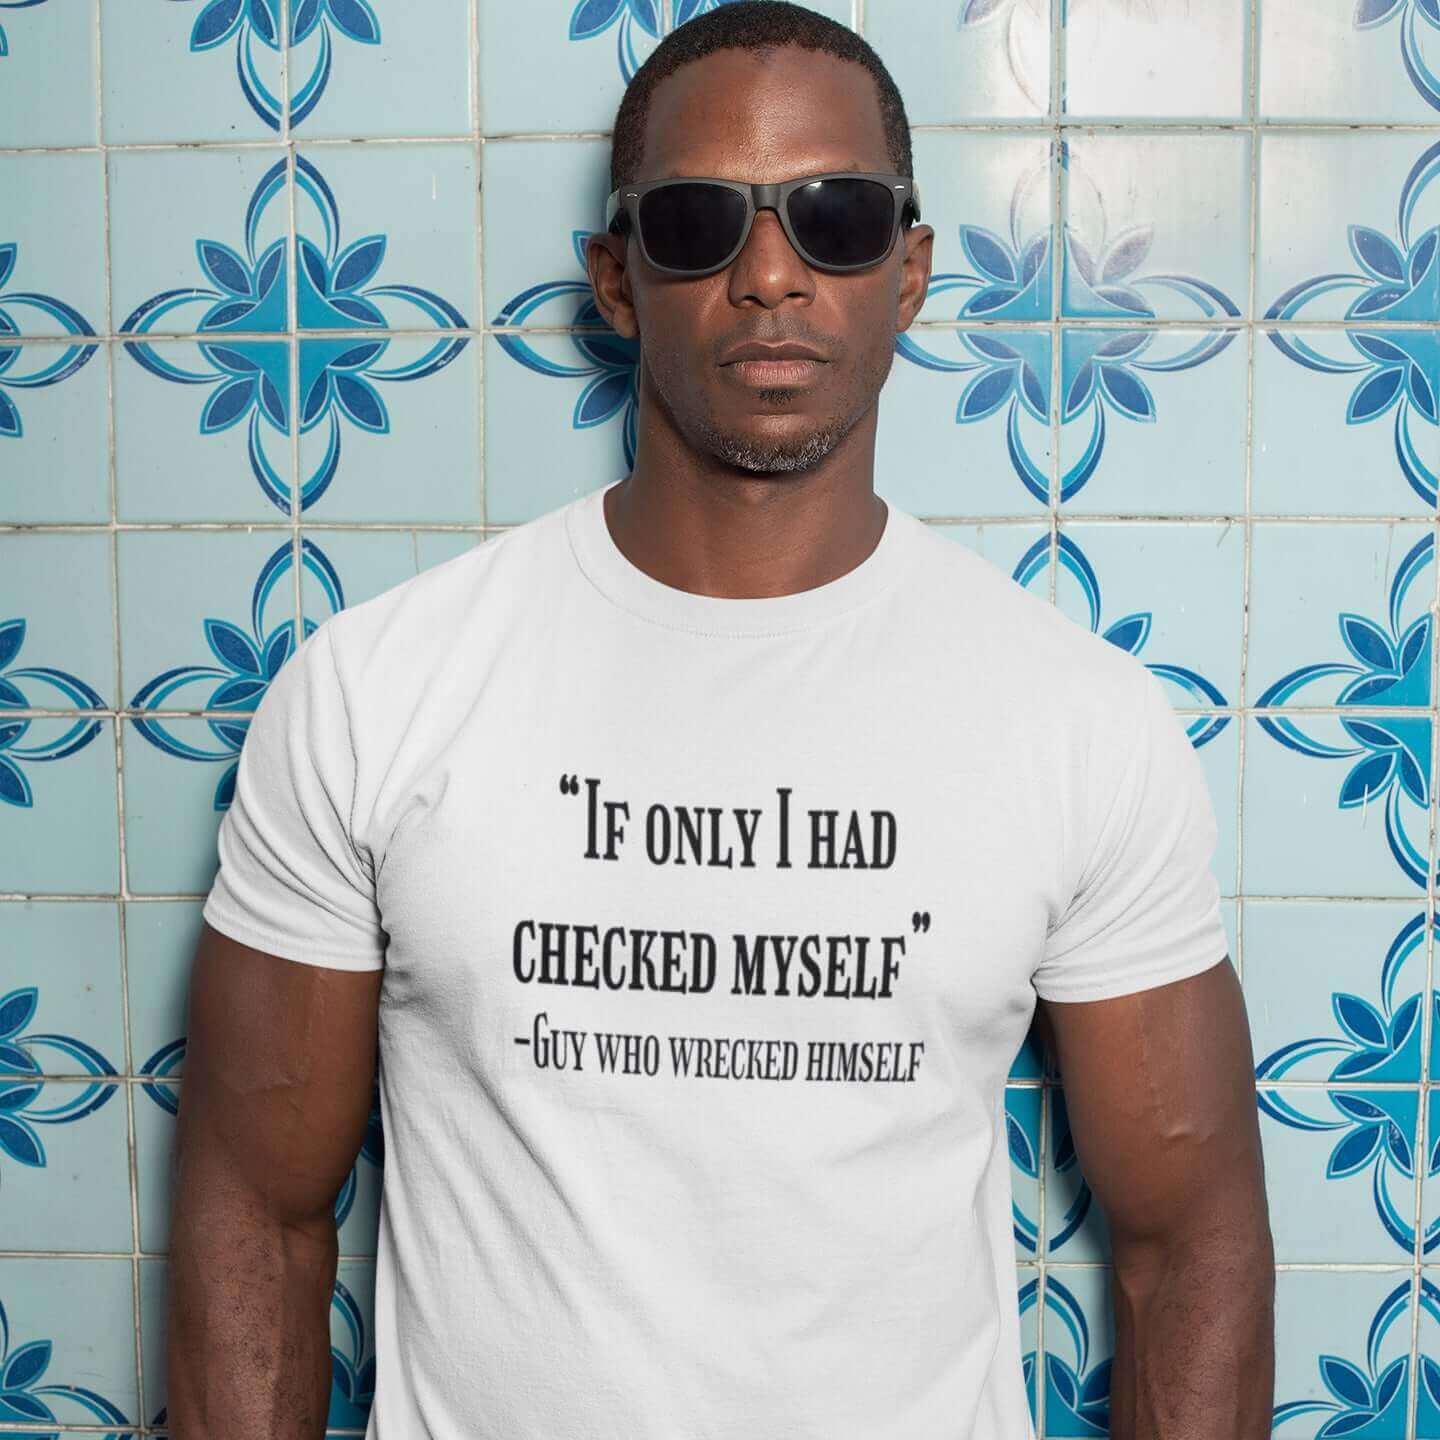 Man wearing sunglasses and a white t-shirt with a funny quote printed on the front. The quote is If only I had checked myself by the guy who wrecked himself.